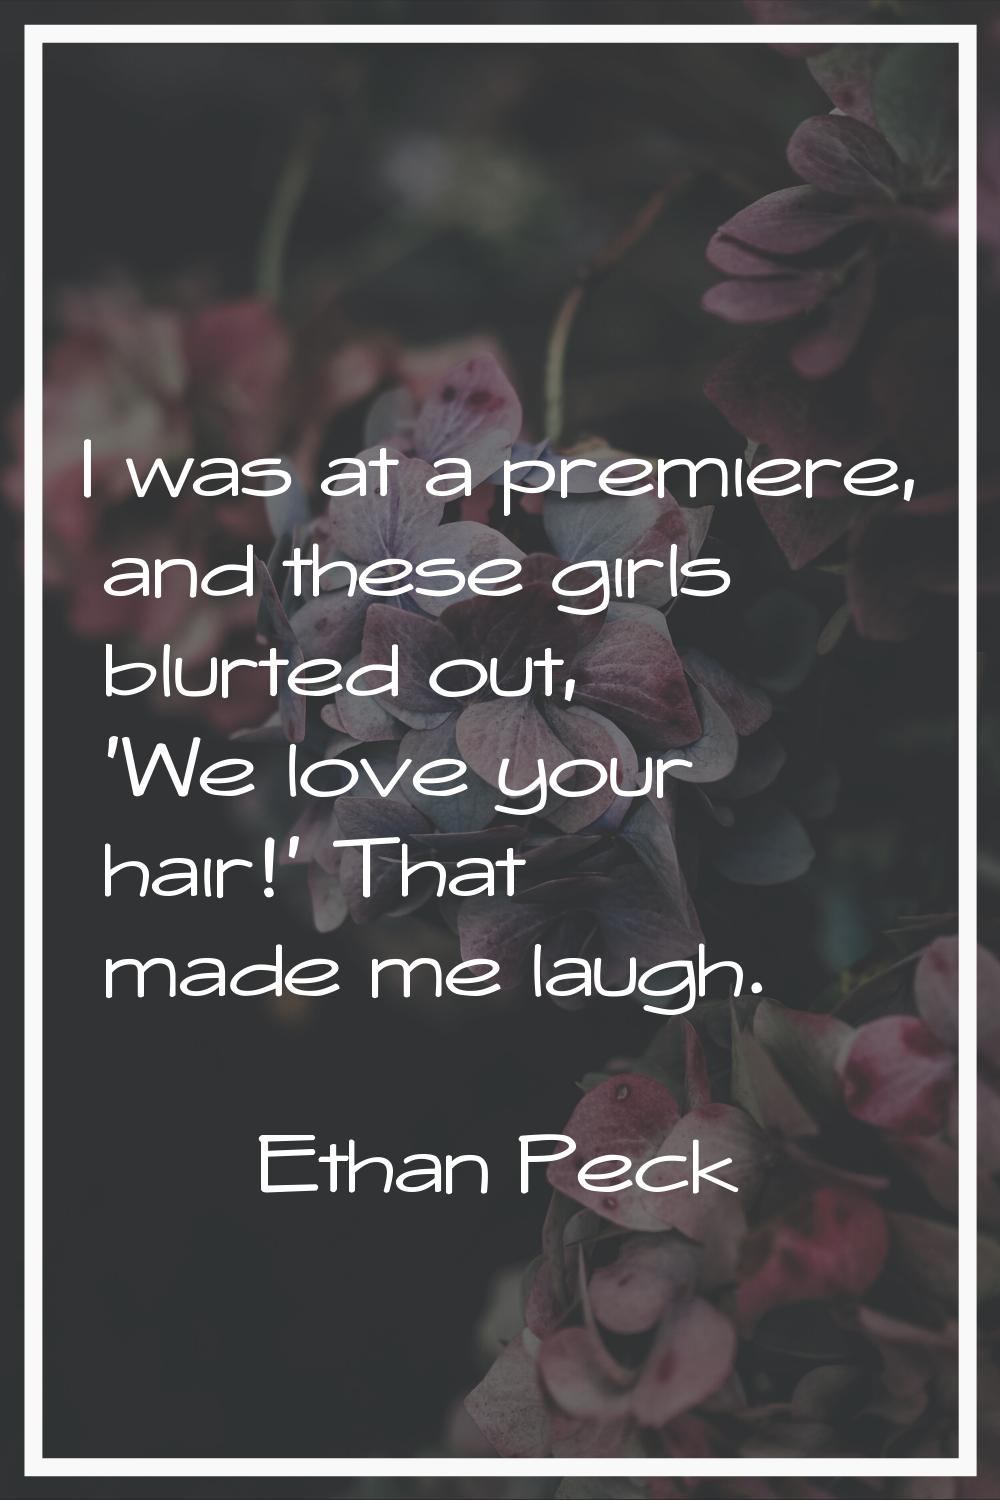 I was at a premiere, and these girls blurted out, 'We love your hair!' That made me laugh.